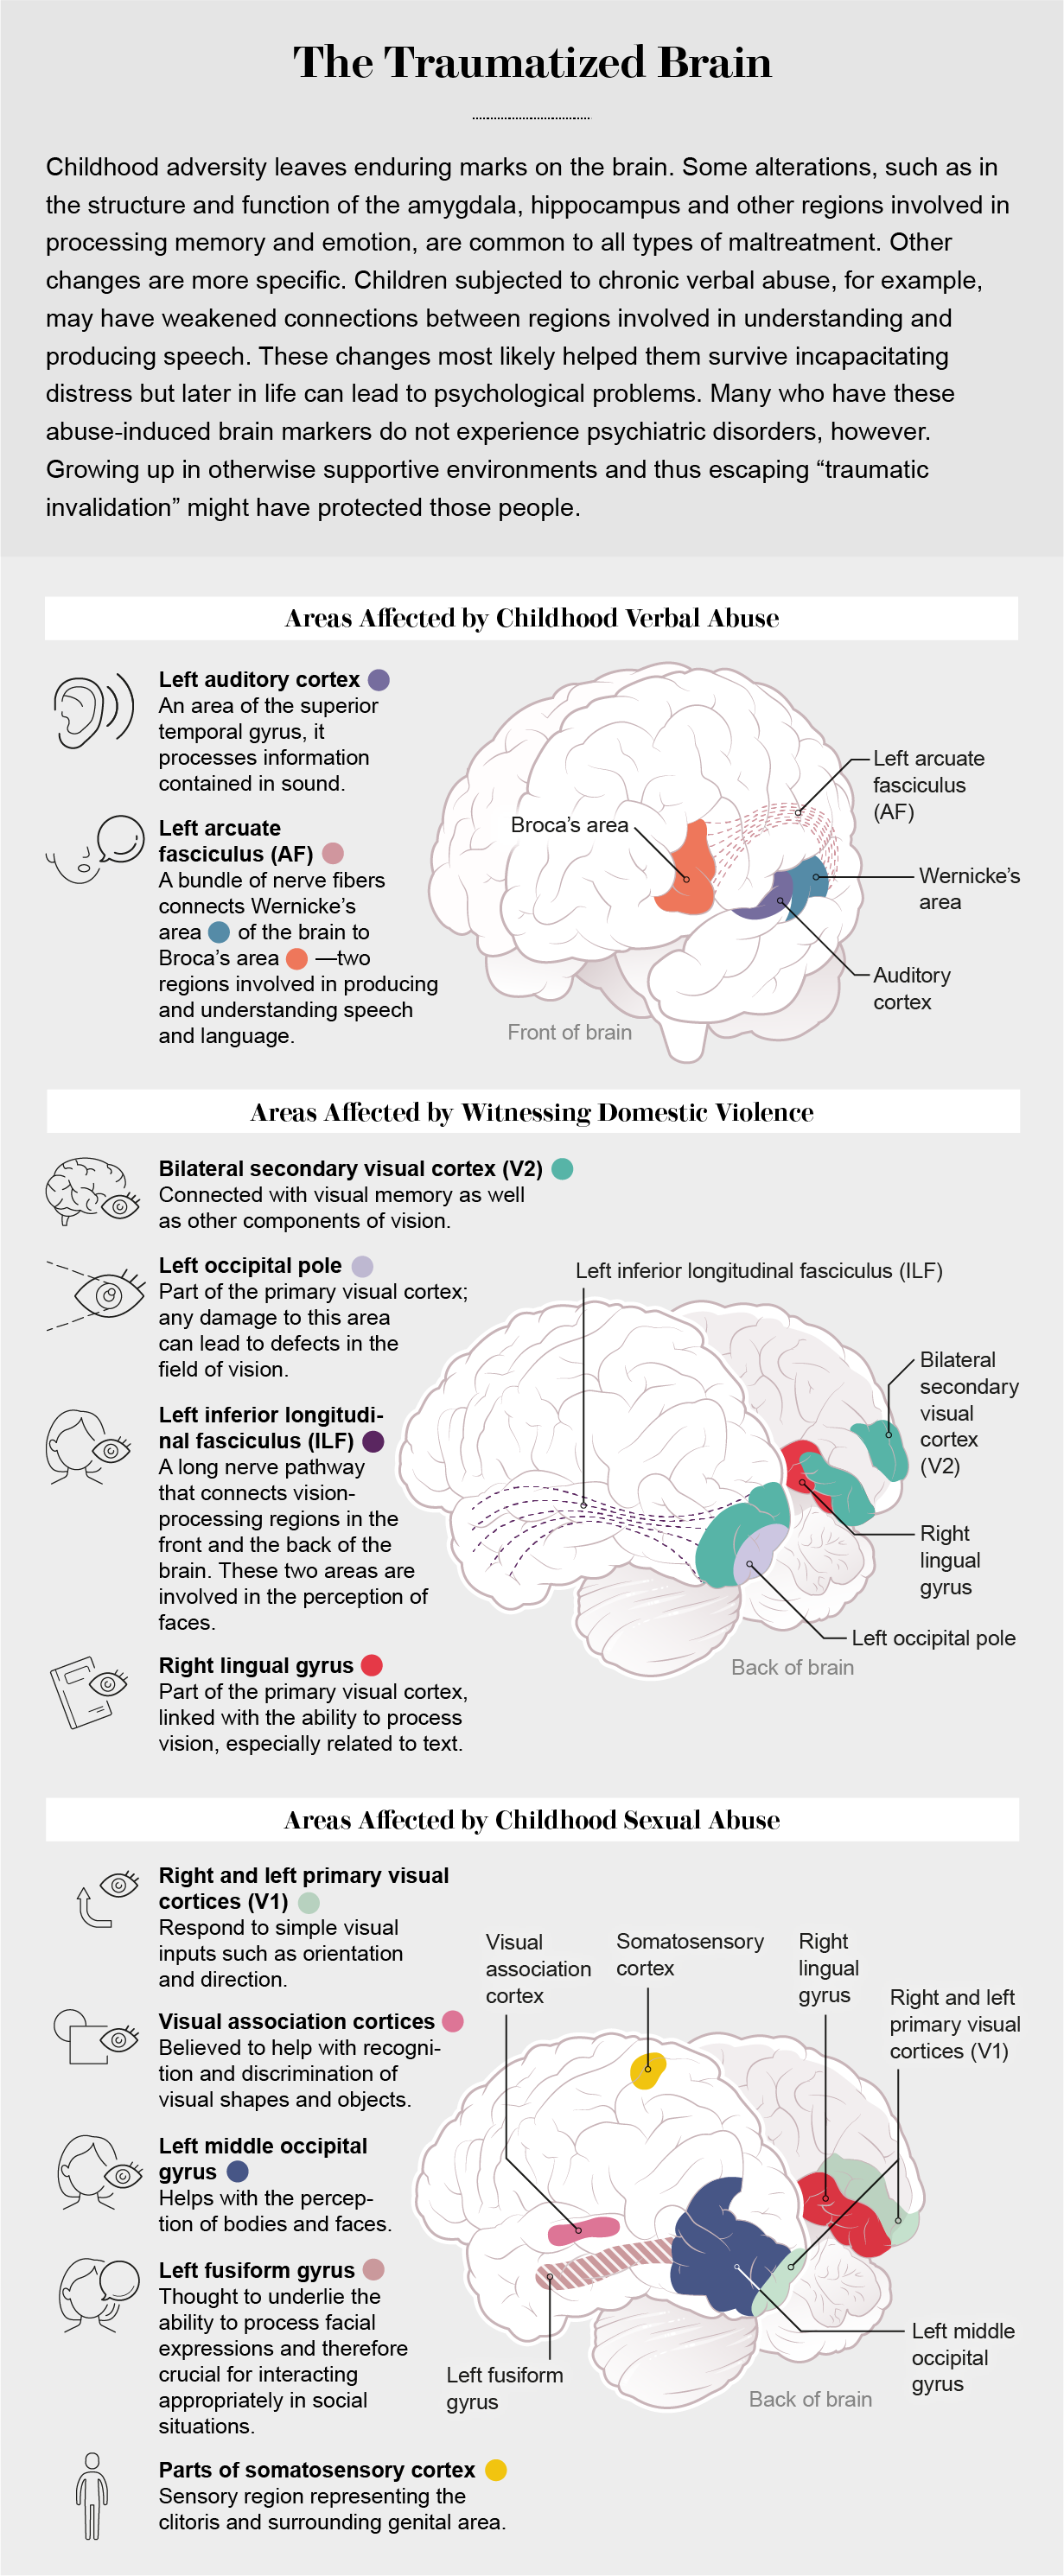 Graphic shows areas of the brain affected by sexual or verbal abuse or by the witness of domestic violence in childhood.